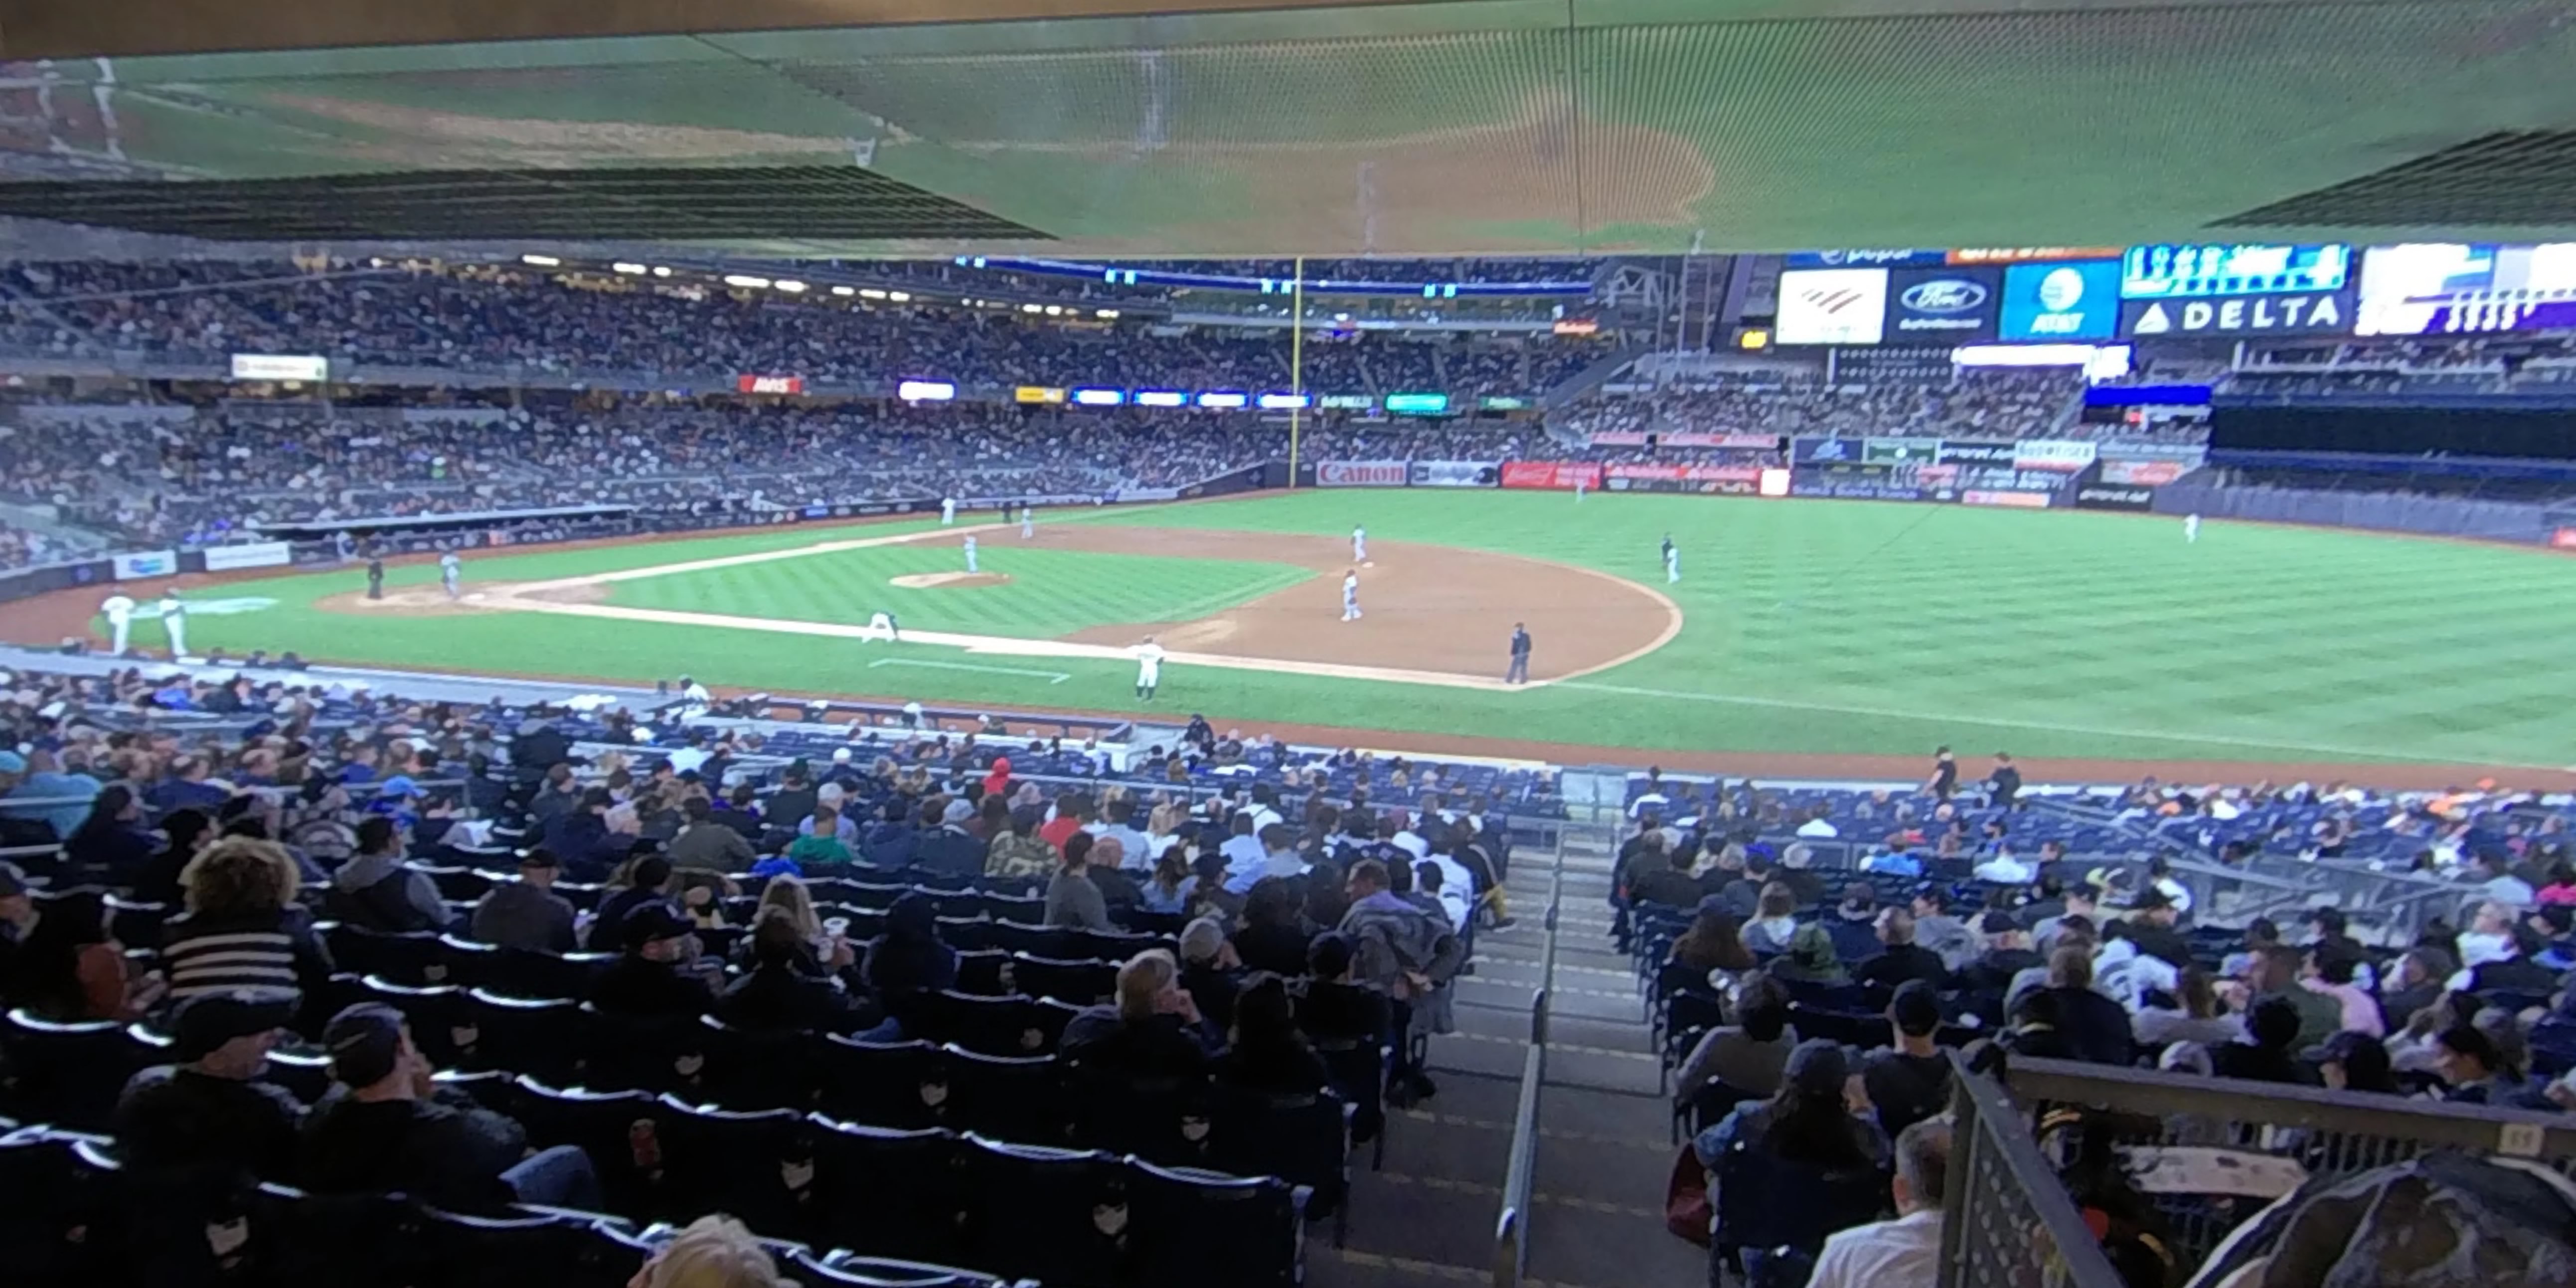 section 114a panoramic seat view  for baseball - yankee stadium